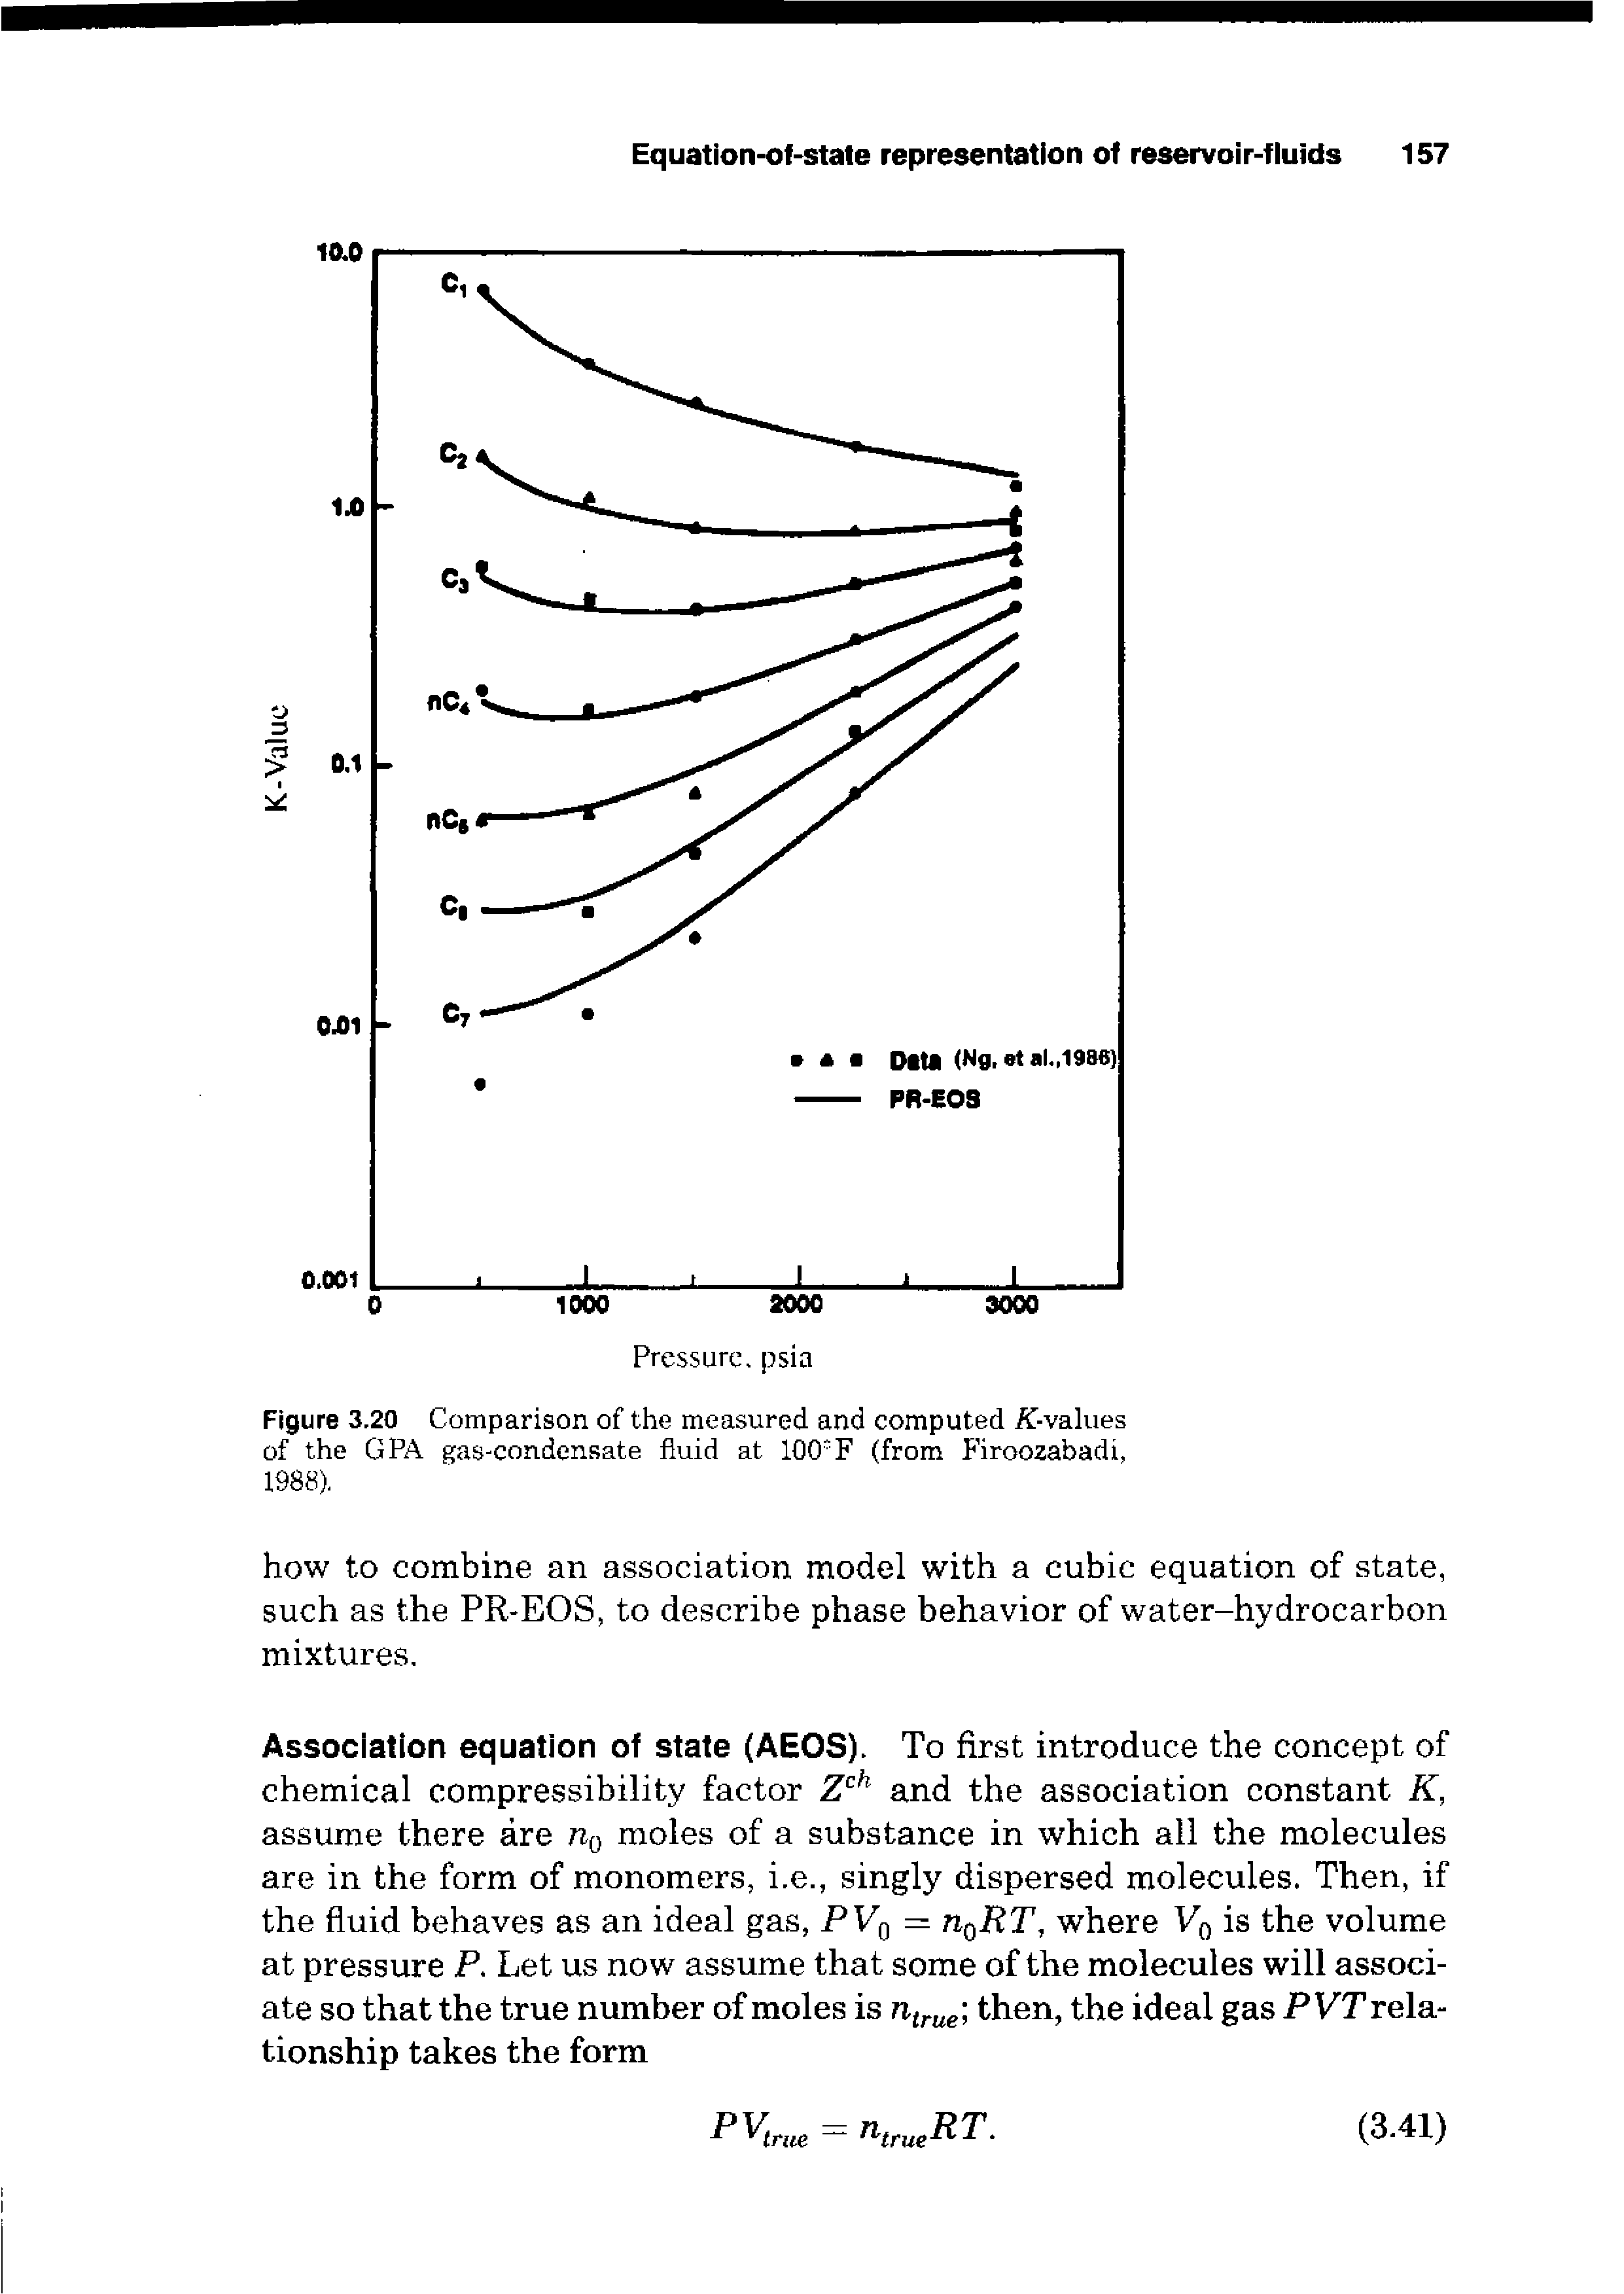 Figure 3.20 Comparison of the measured and computed if-values of the GPA gas-condensate fluid at 100 F (from Firoozabadi,...